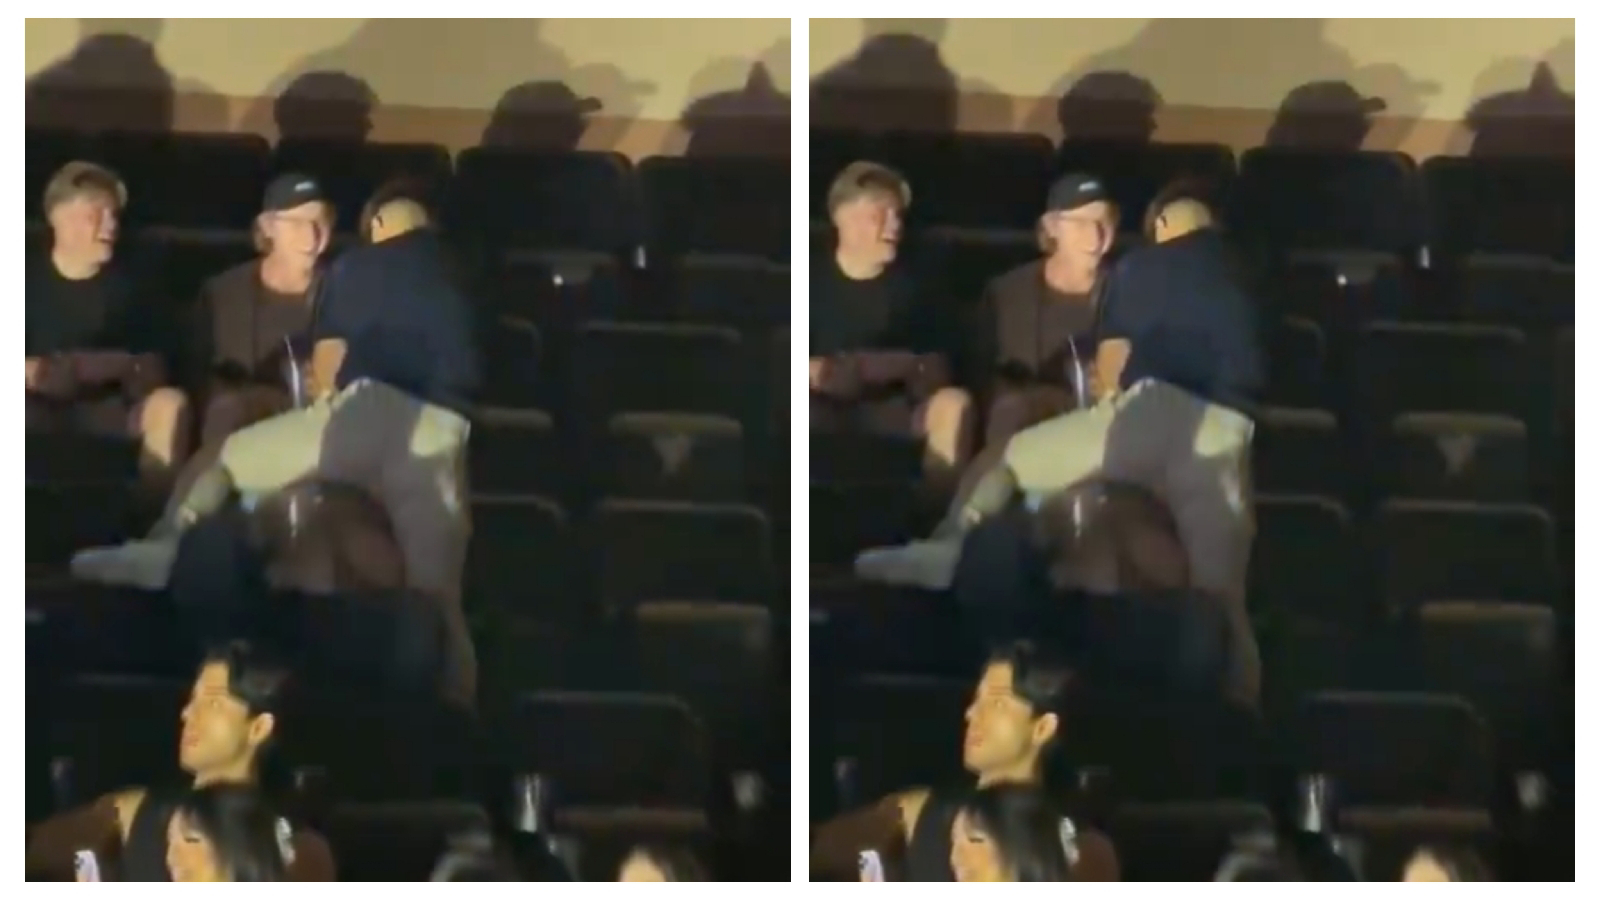 A Guy Getting BlowJob From Another Gay Guy in Stadium During Madison Beer Spinnin Tour in Vegas Goes Viral